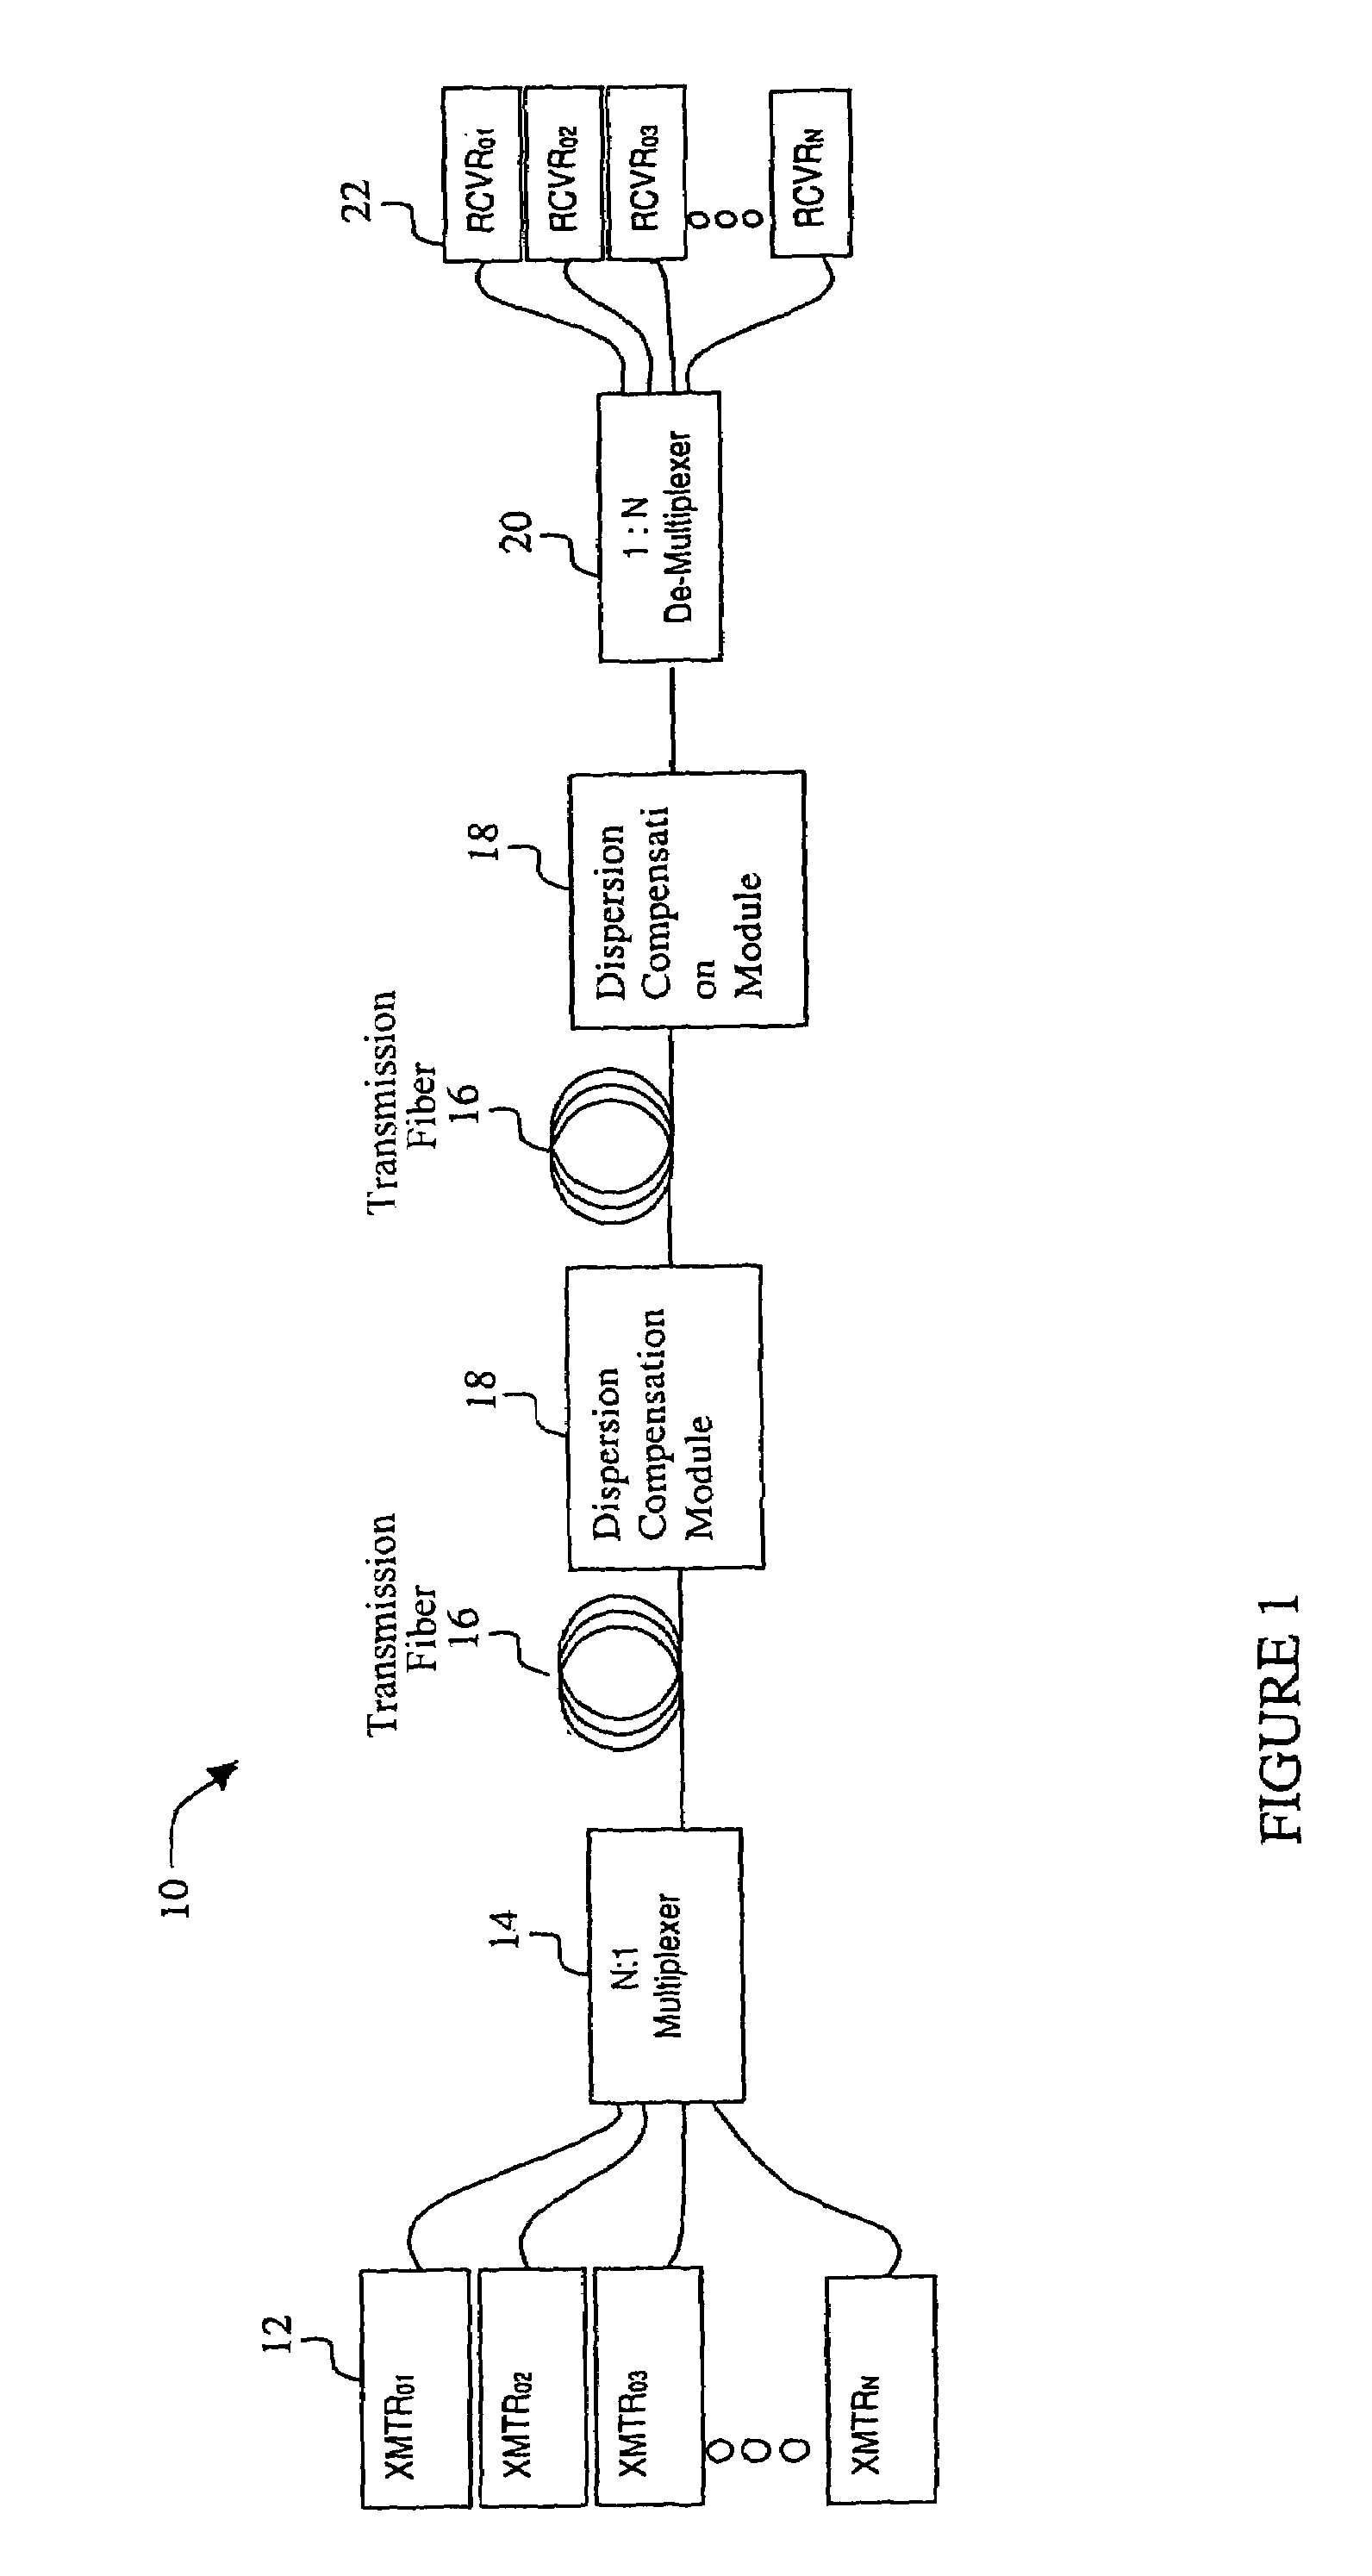 Method and system for providing tunable dispersion compensation